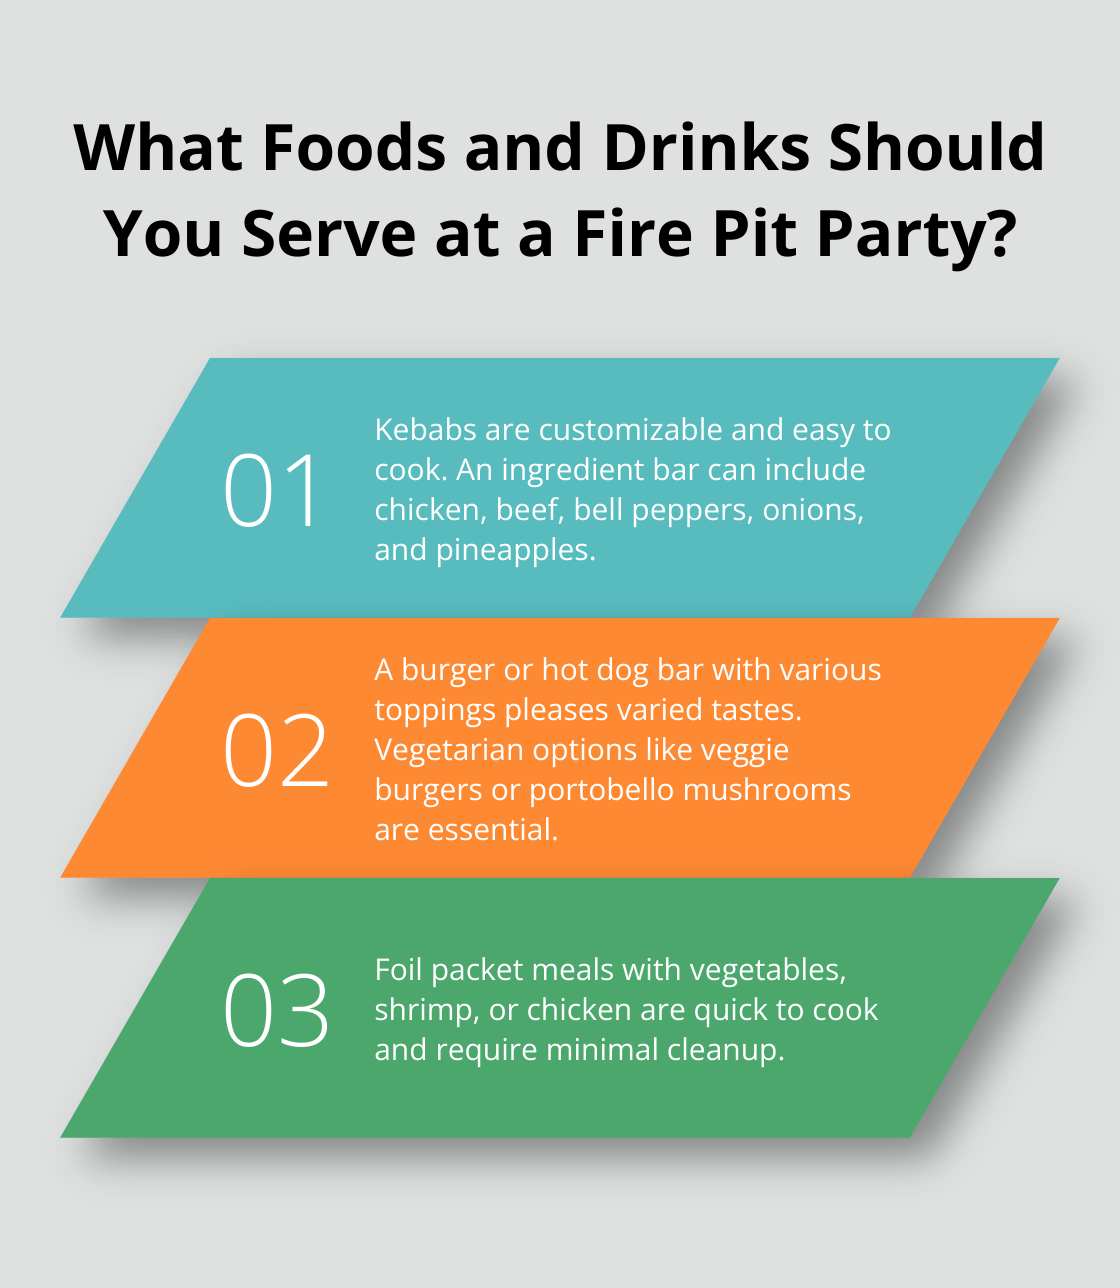 Fact - What Foods and Drinks Should You Serve at a Fire Pit Party?